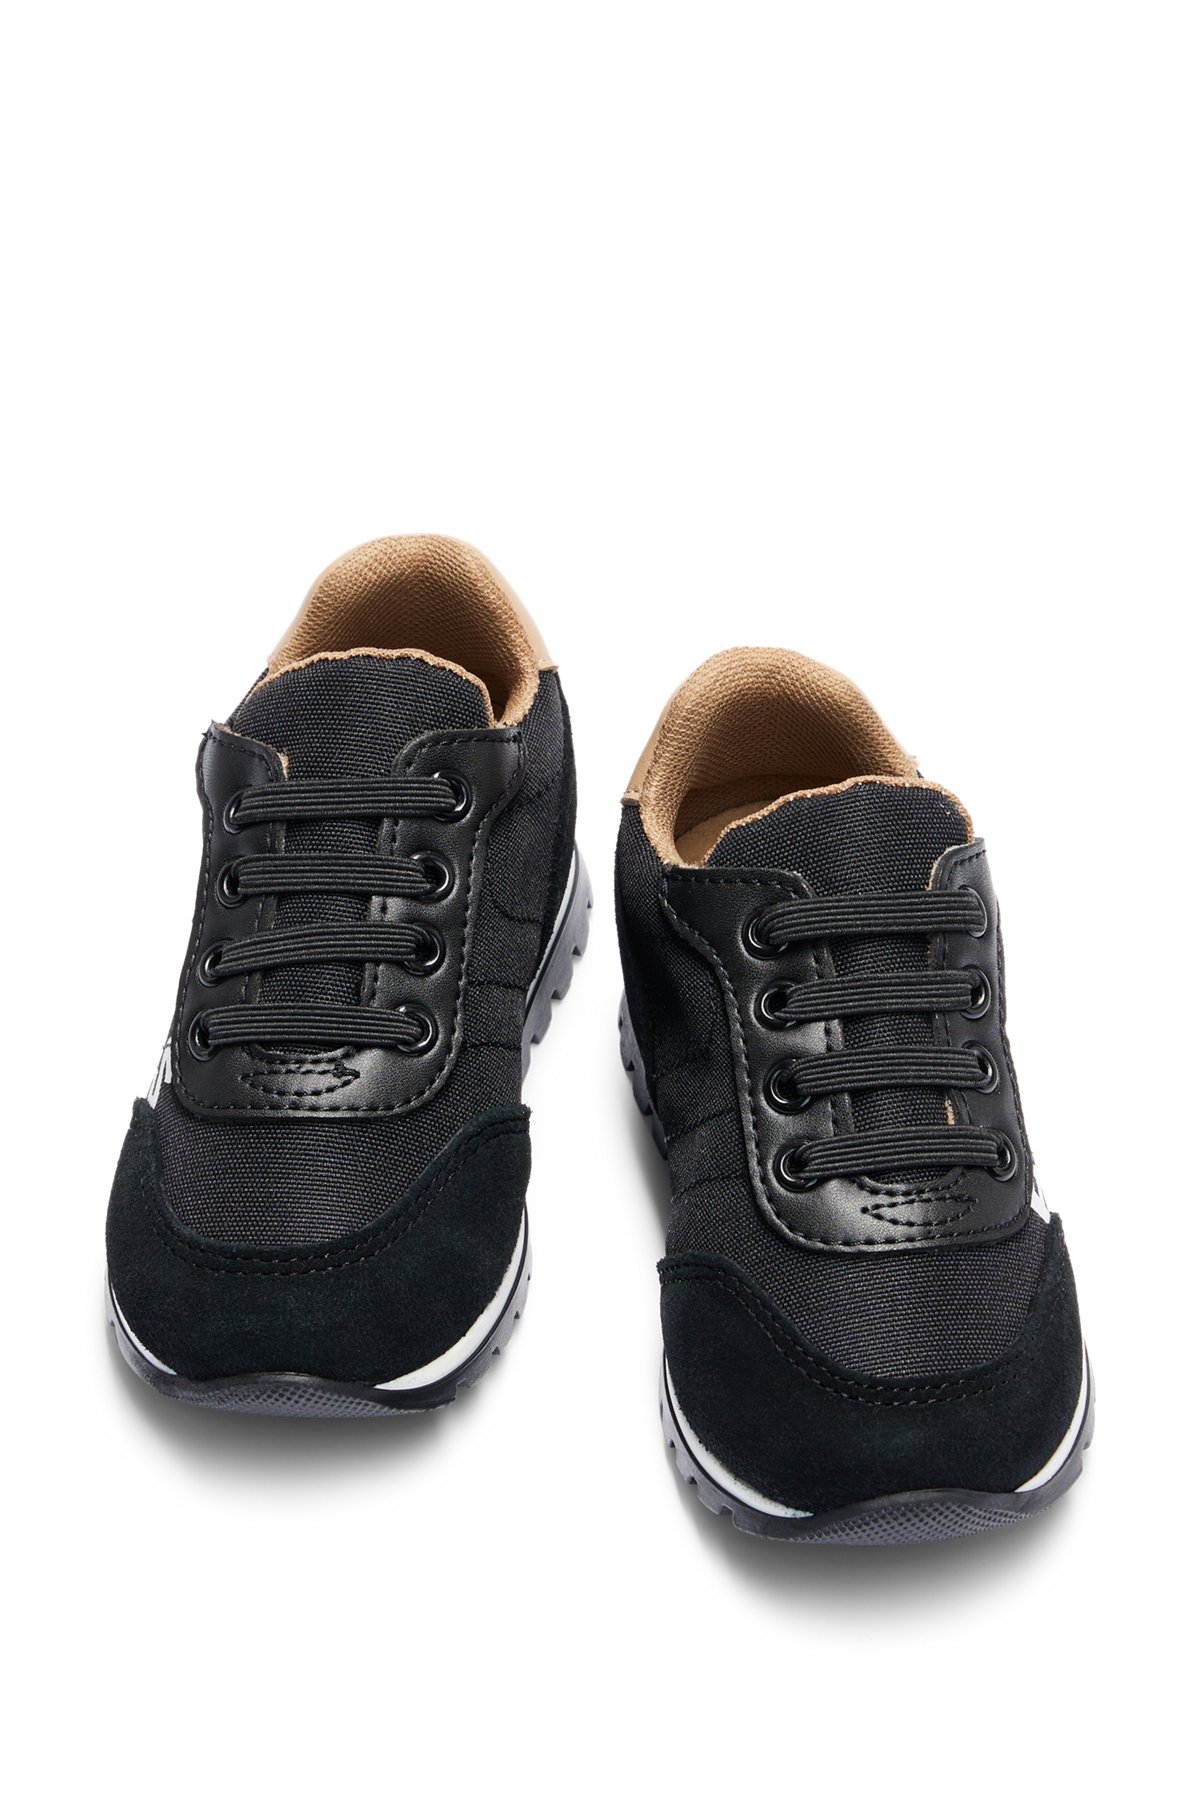 Kids' hybrid trainers with contrast logo, Black